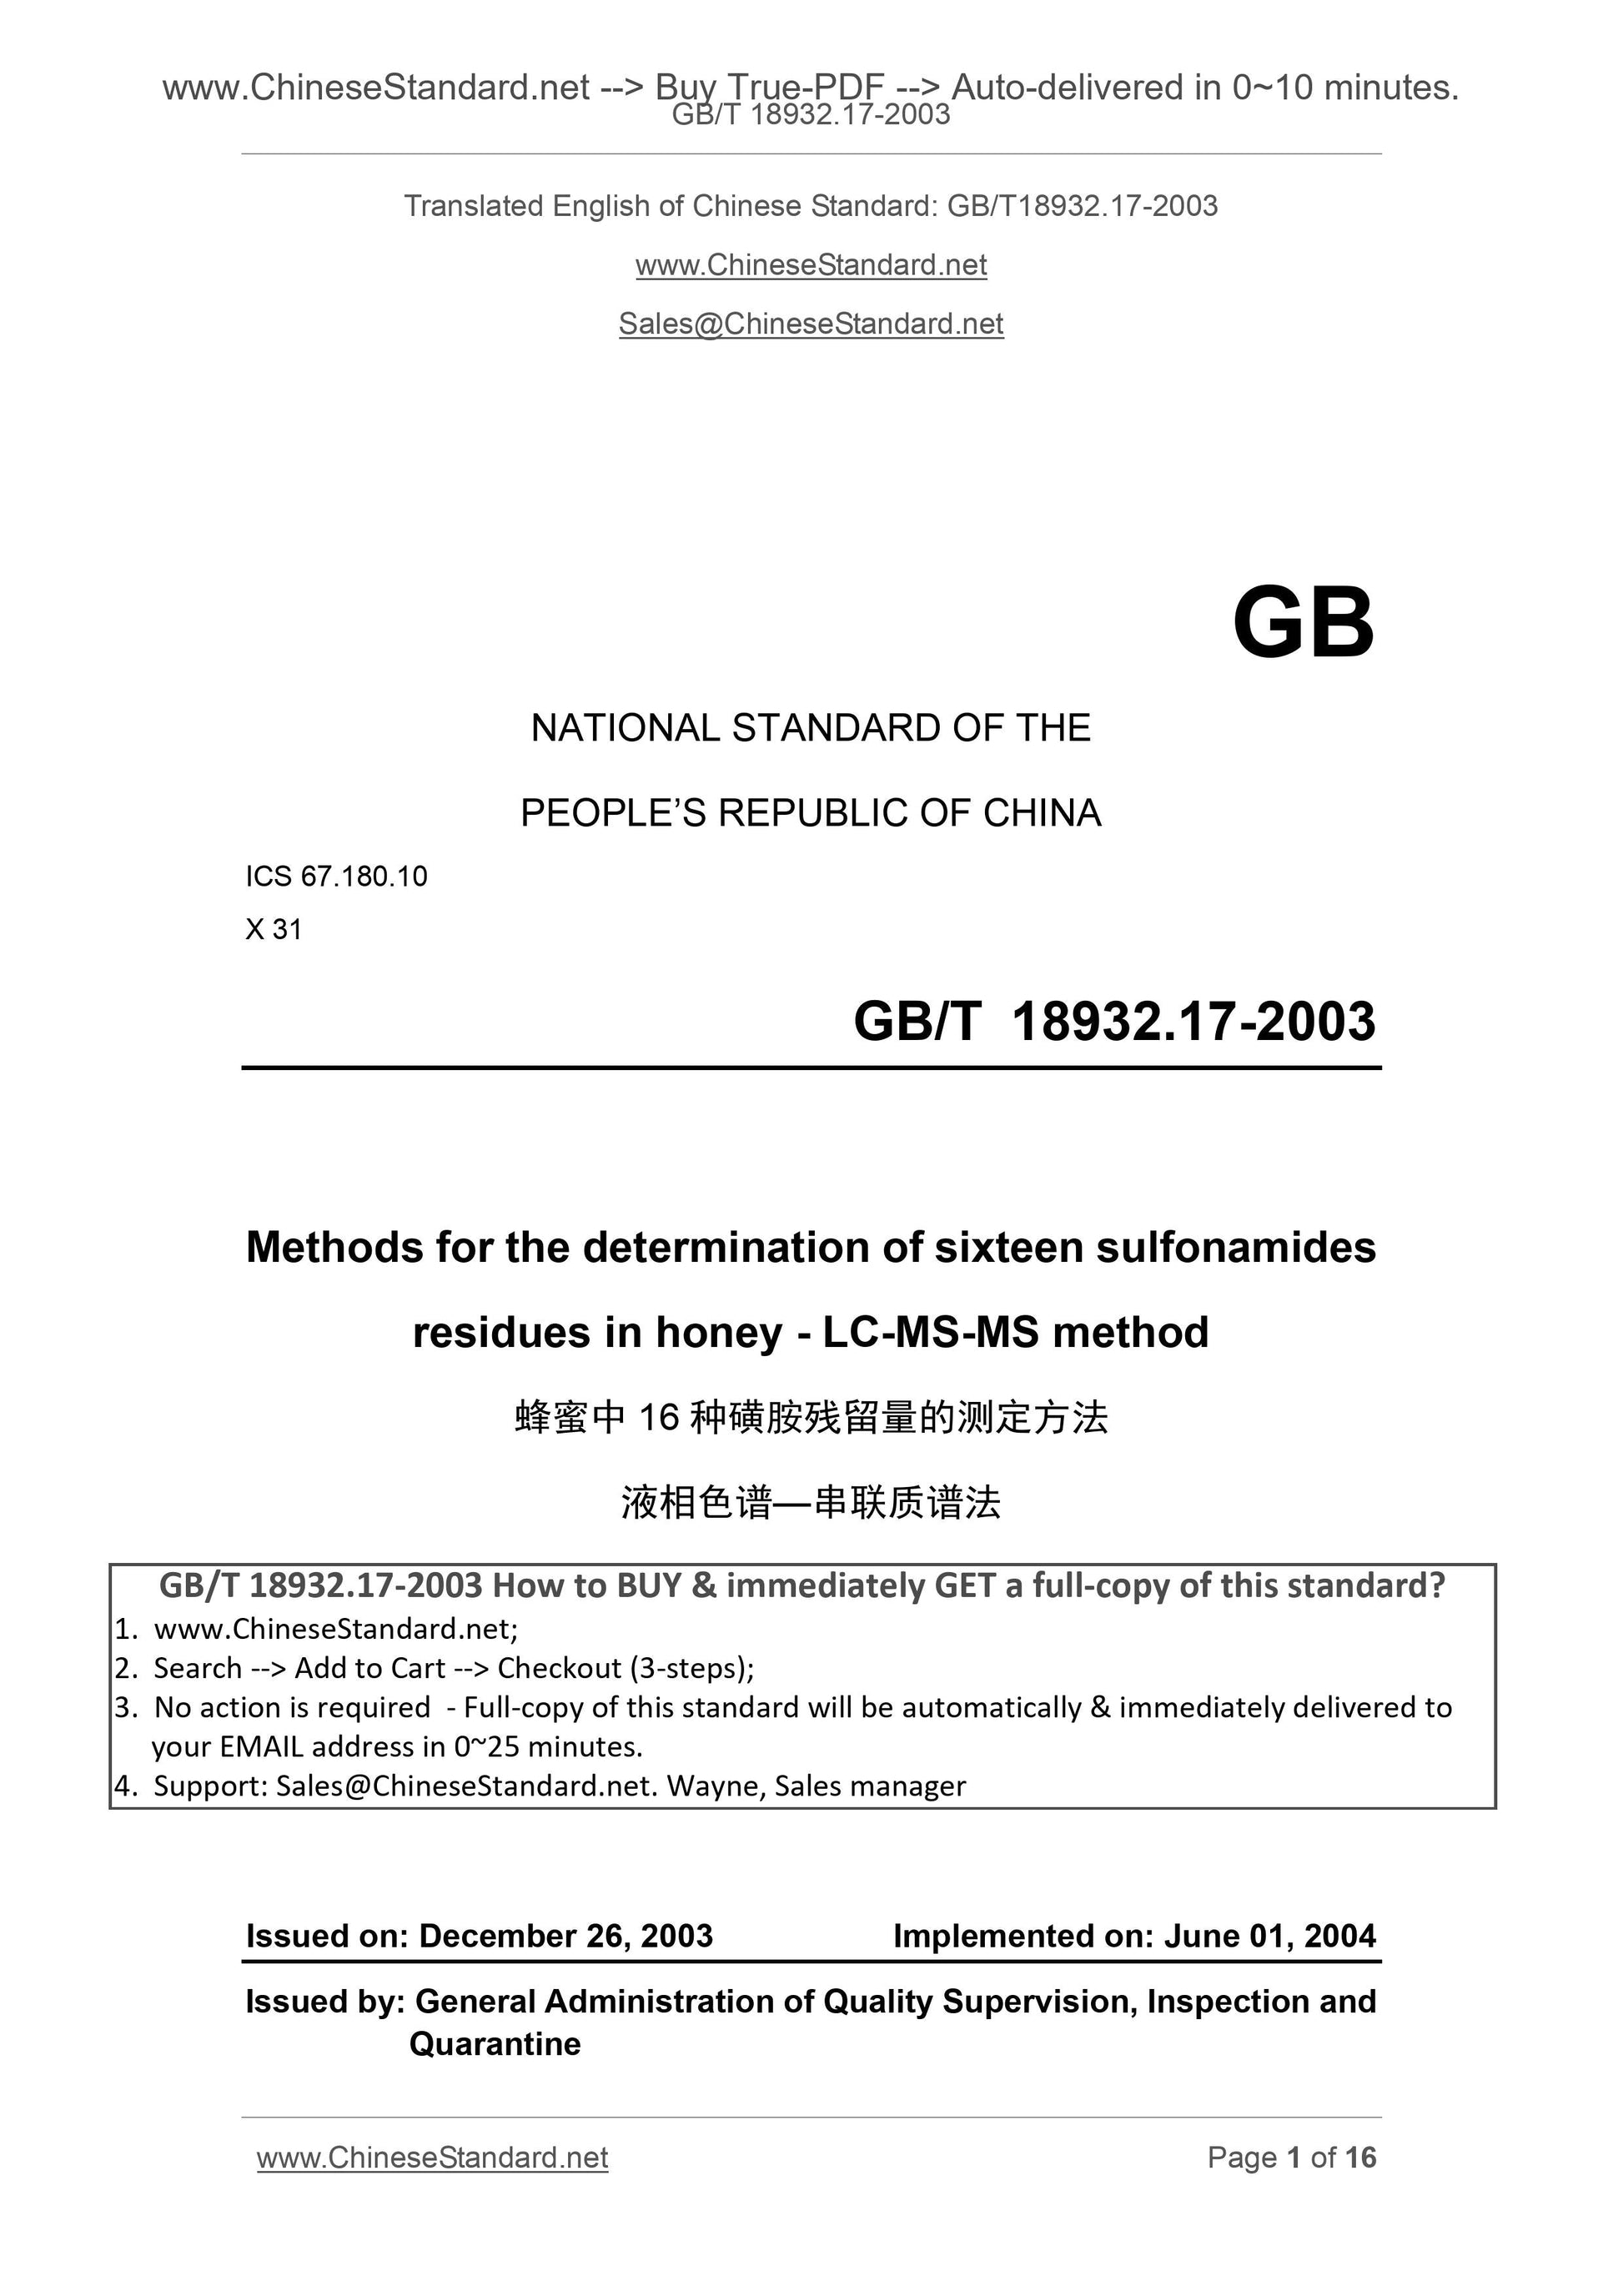 GB/T 18932.17-2003 Page 1